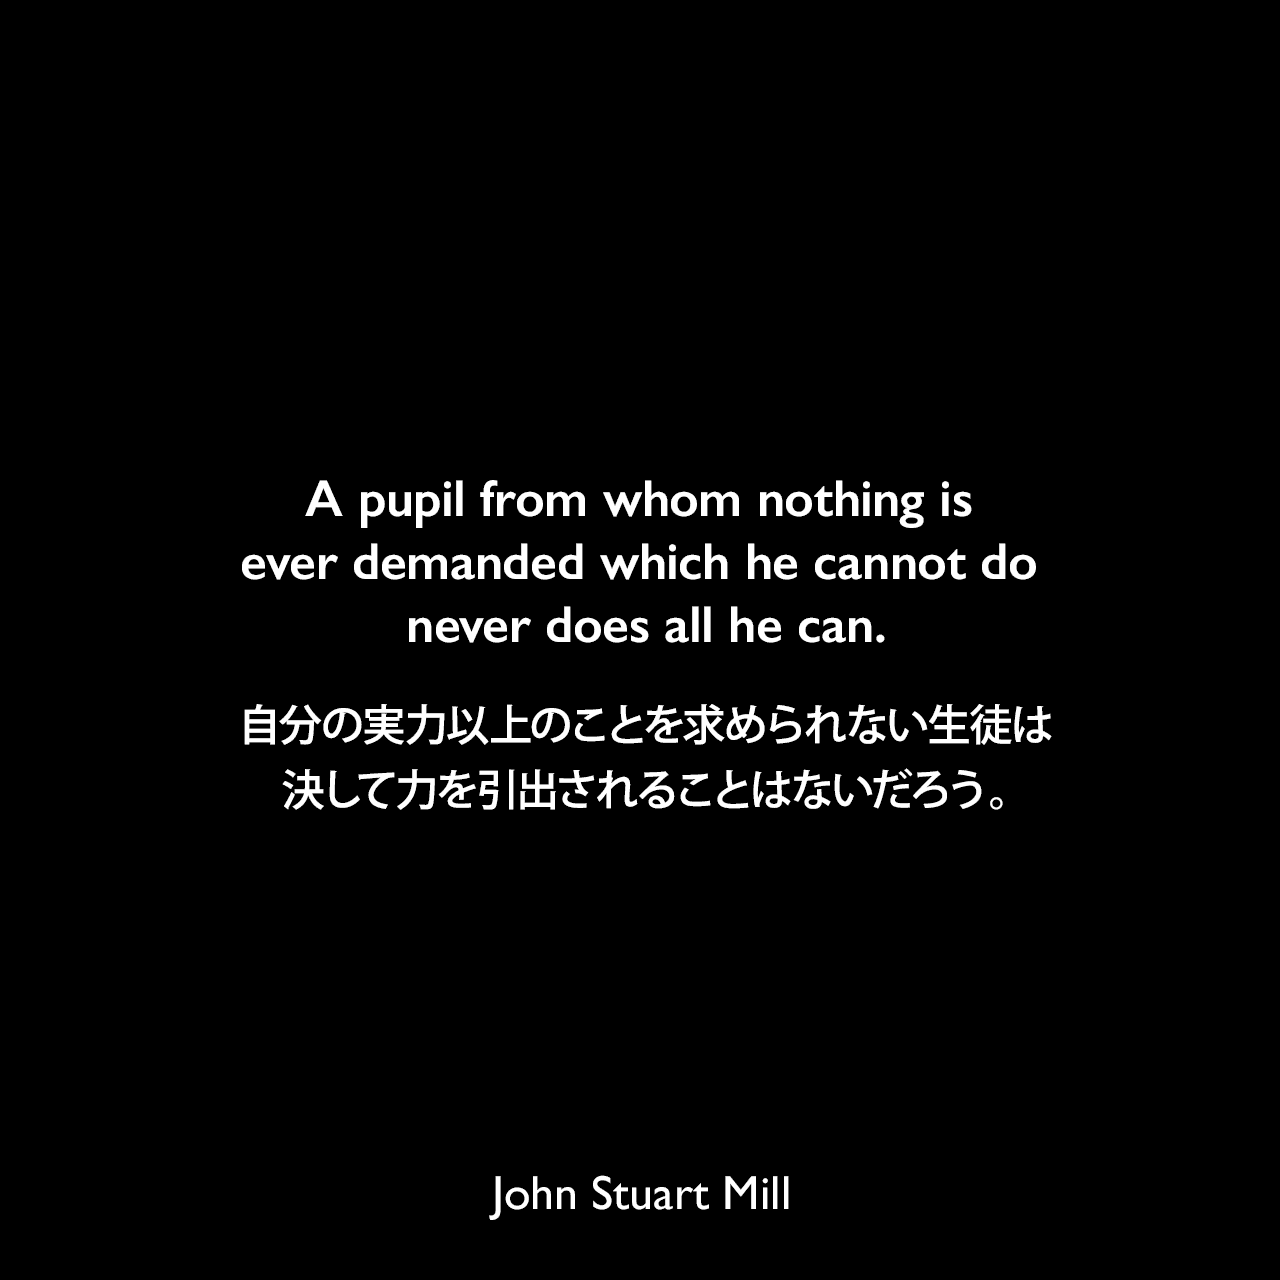 A pupil from whom nothing is ever demanded which he cannot do never does all he can.自分の実力以上のことを求められない生徒は、決して力を引出されることはないだろう。- ジョン・スチュアート・ミルの自伝よりJohn Stuart Mill